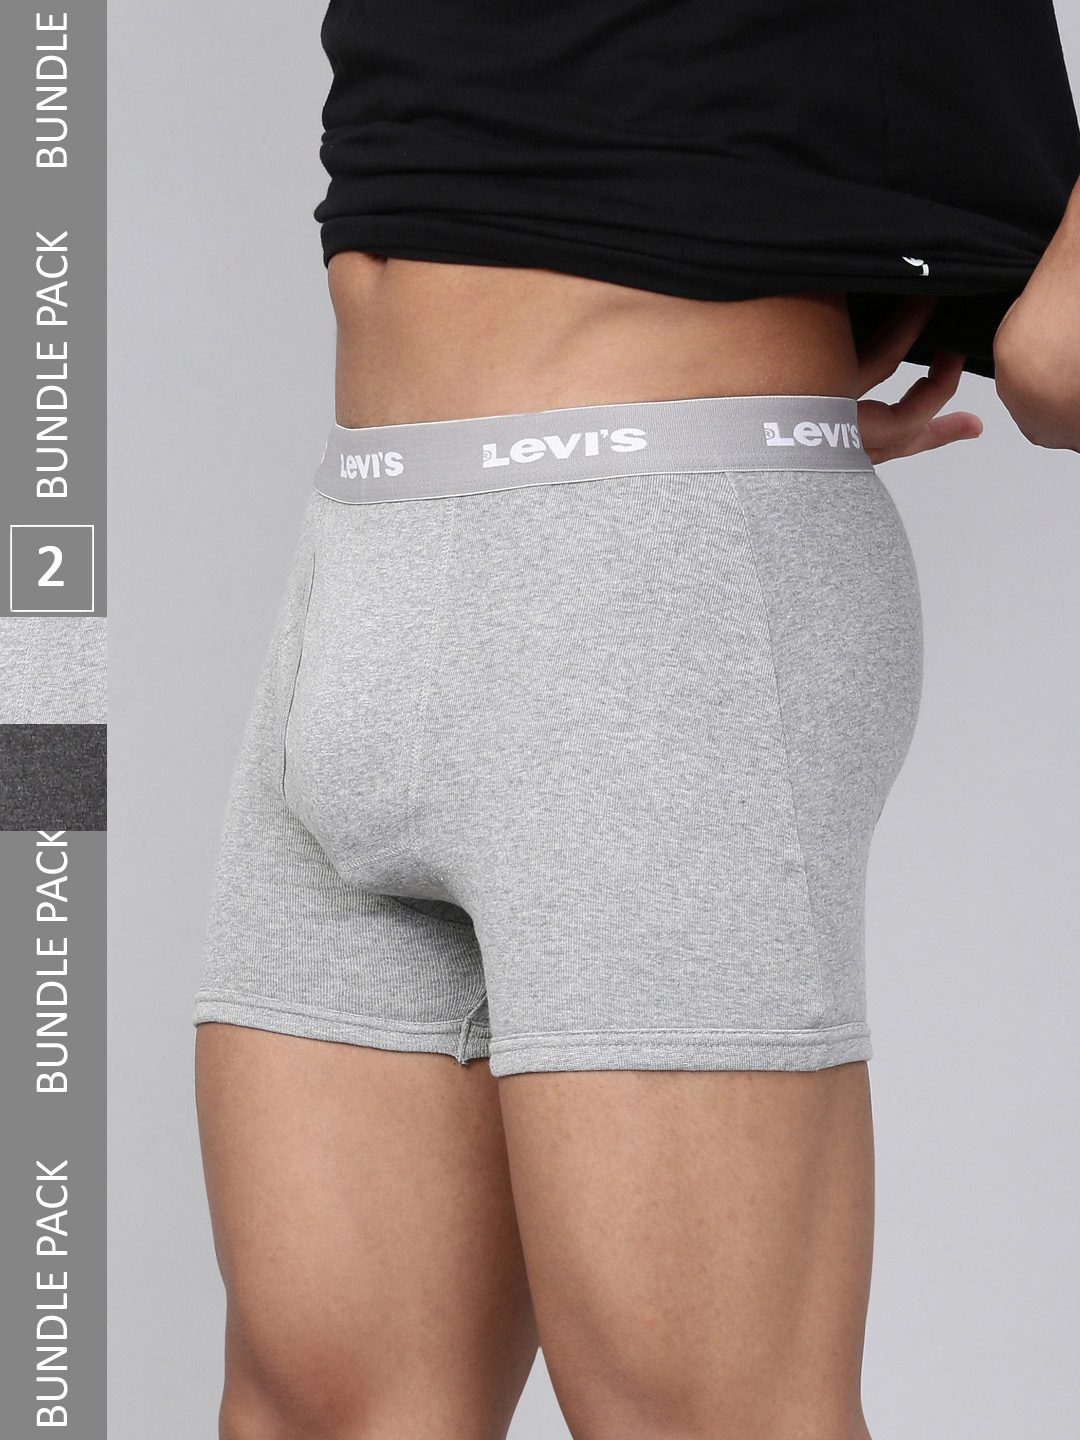 

Levis Pack of 2 Smartskin Technology Cotton Trunks with Tag Free Comfort #001-BOXER BRIEF, Grey